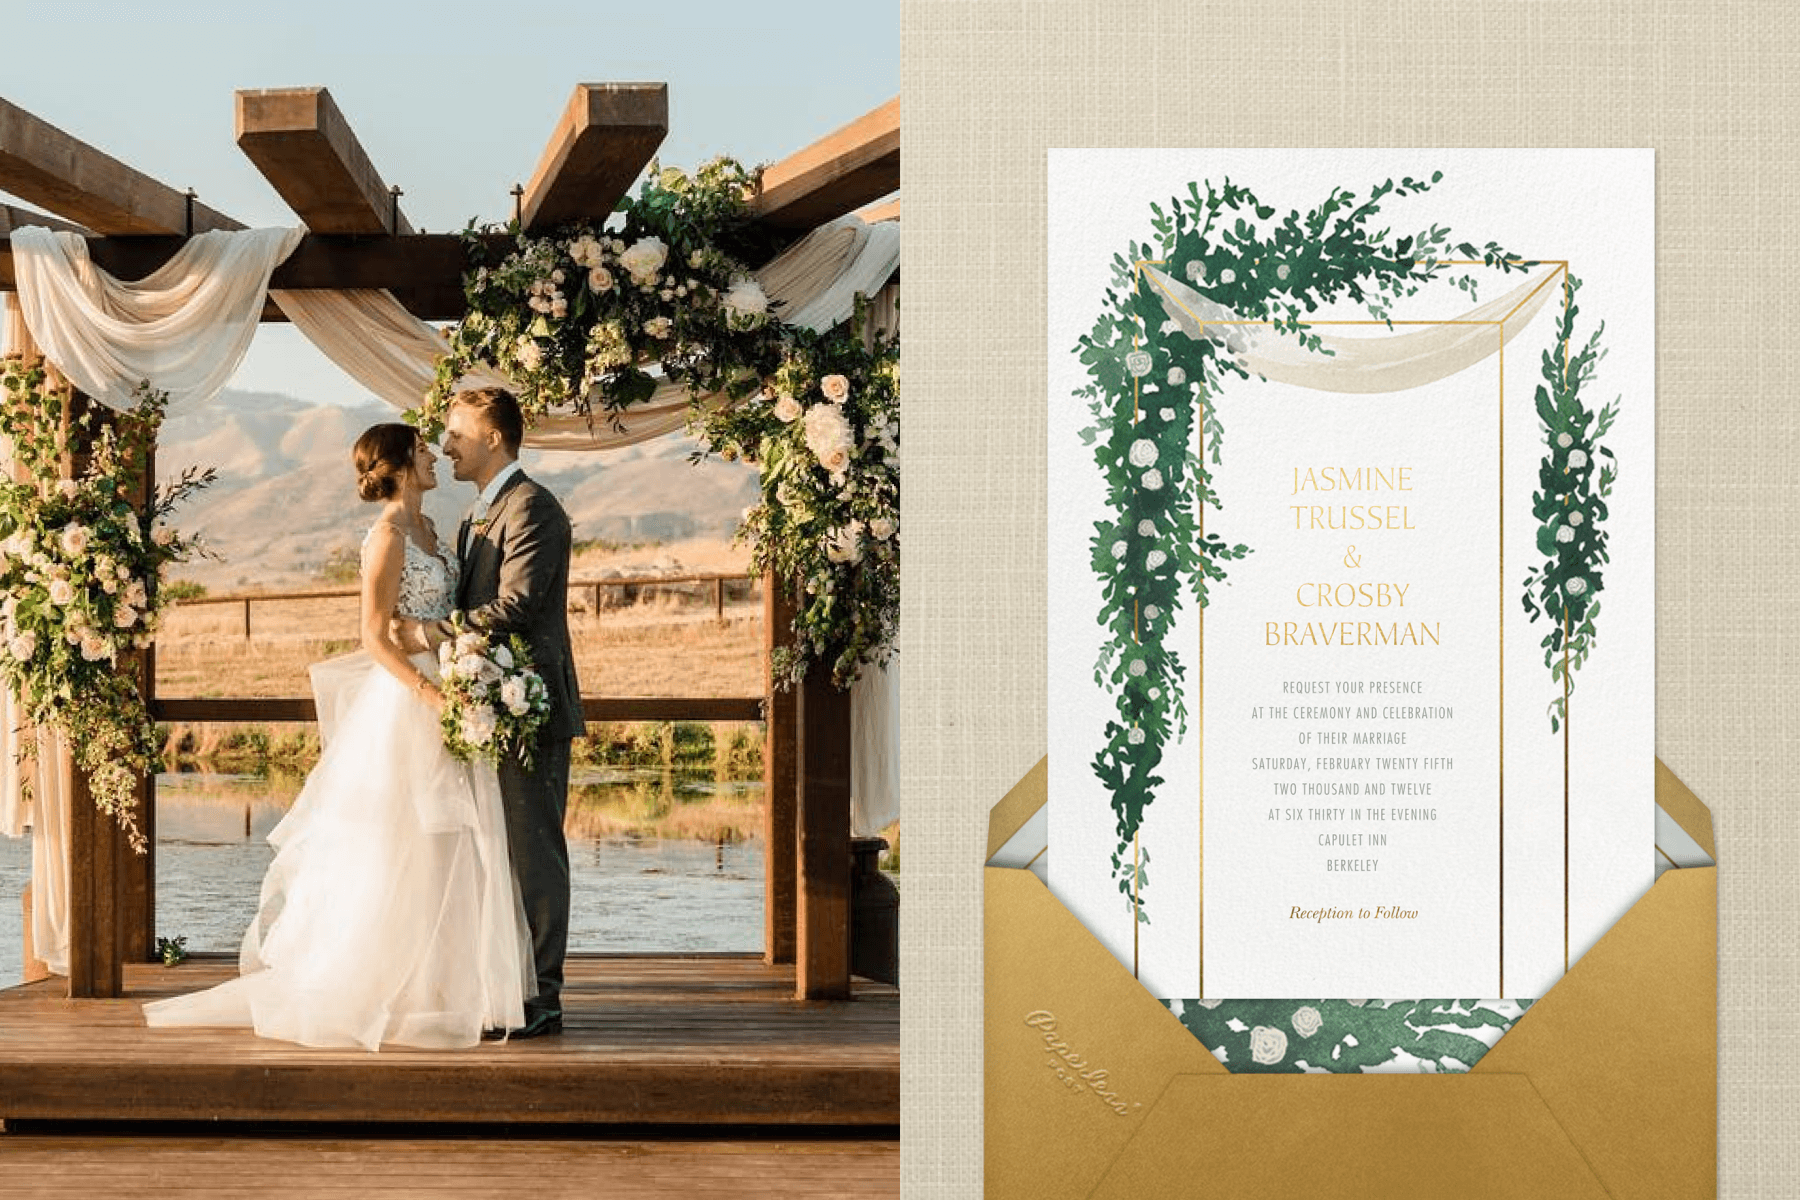 Left: couple in wedding attire embrace under a wooden wedding arbor. Right: wedding invitation with a chuppah and greenery trailing off it